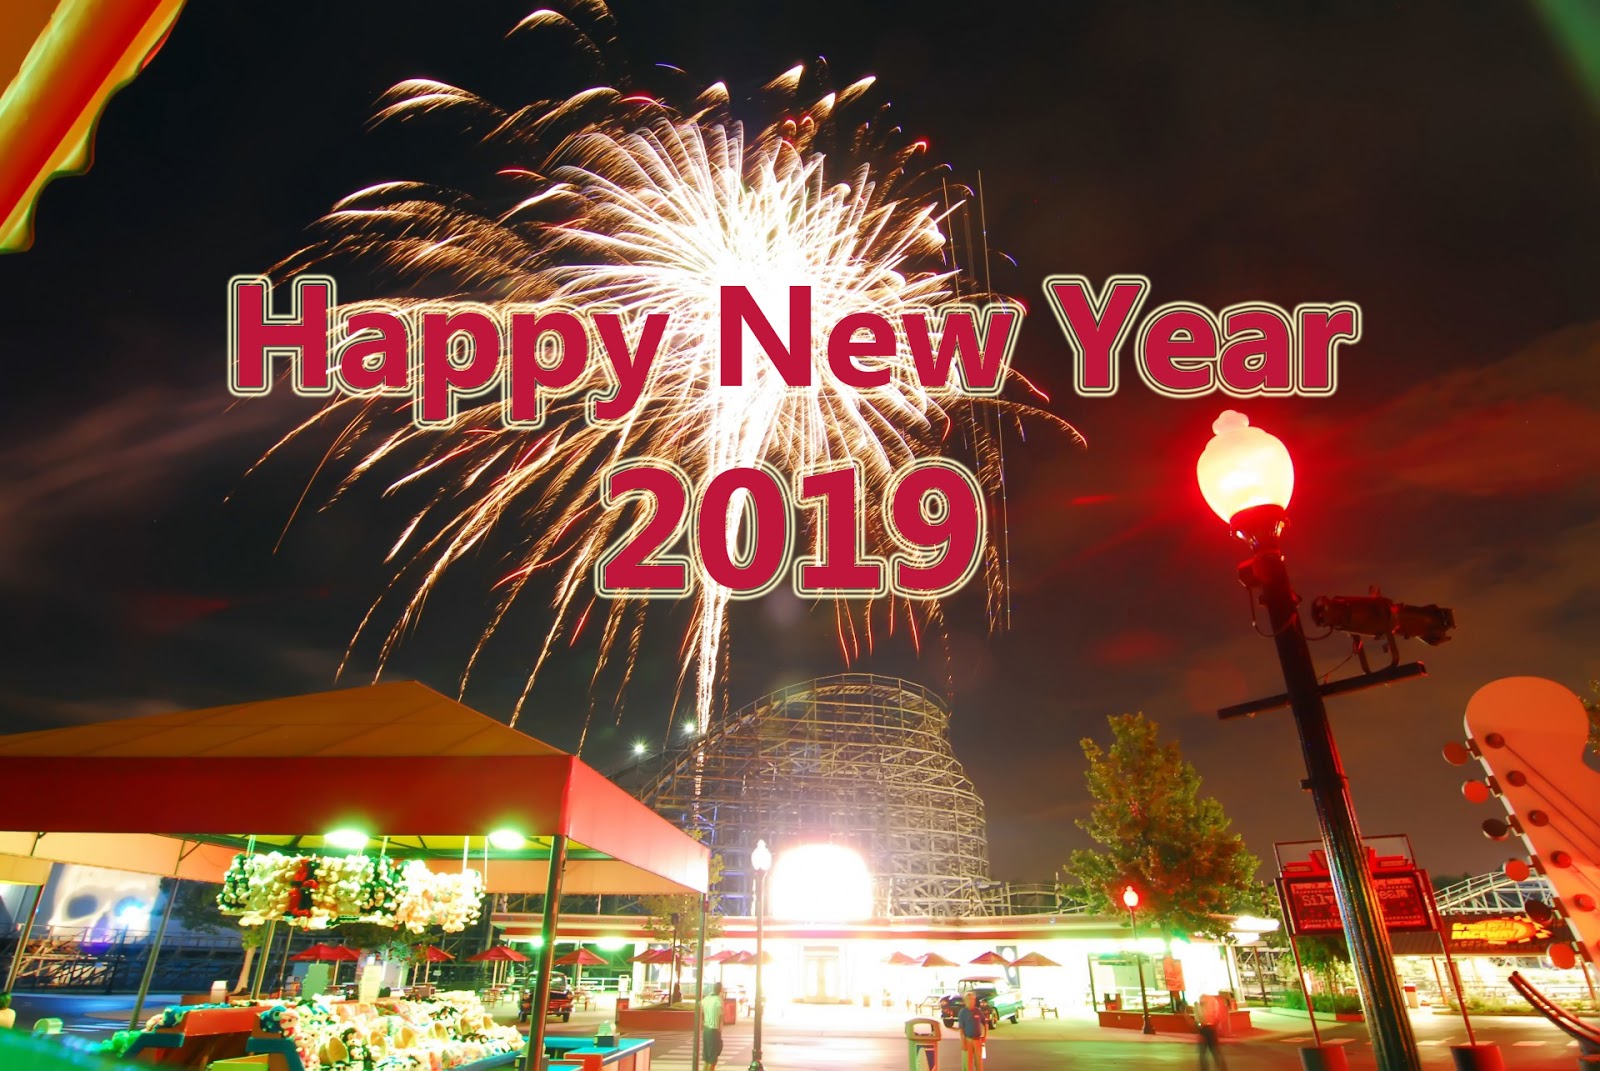 Happy New Year 2019 Fireworks Wallpaper